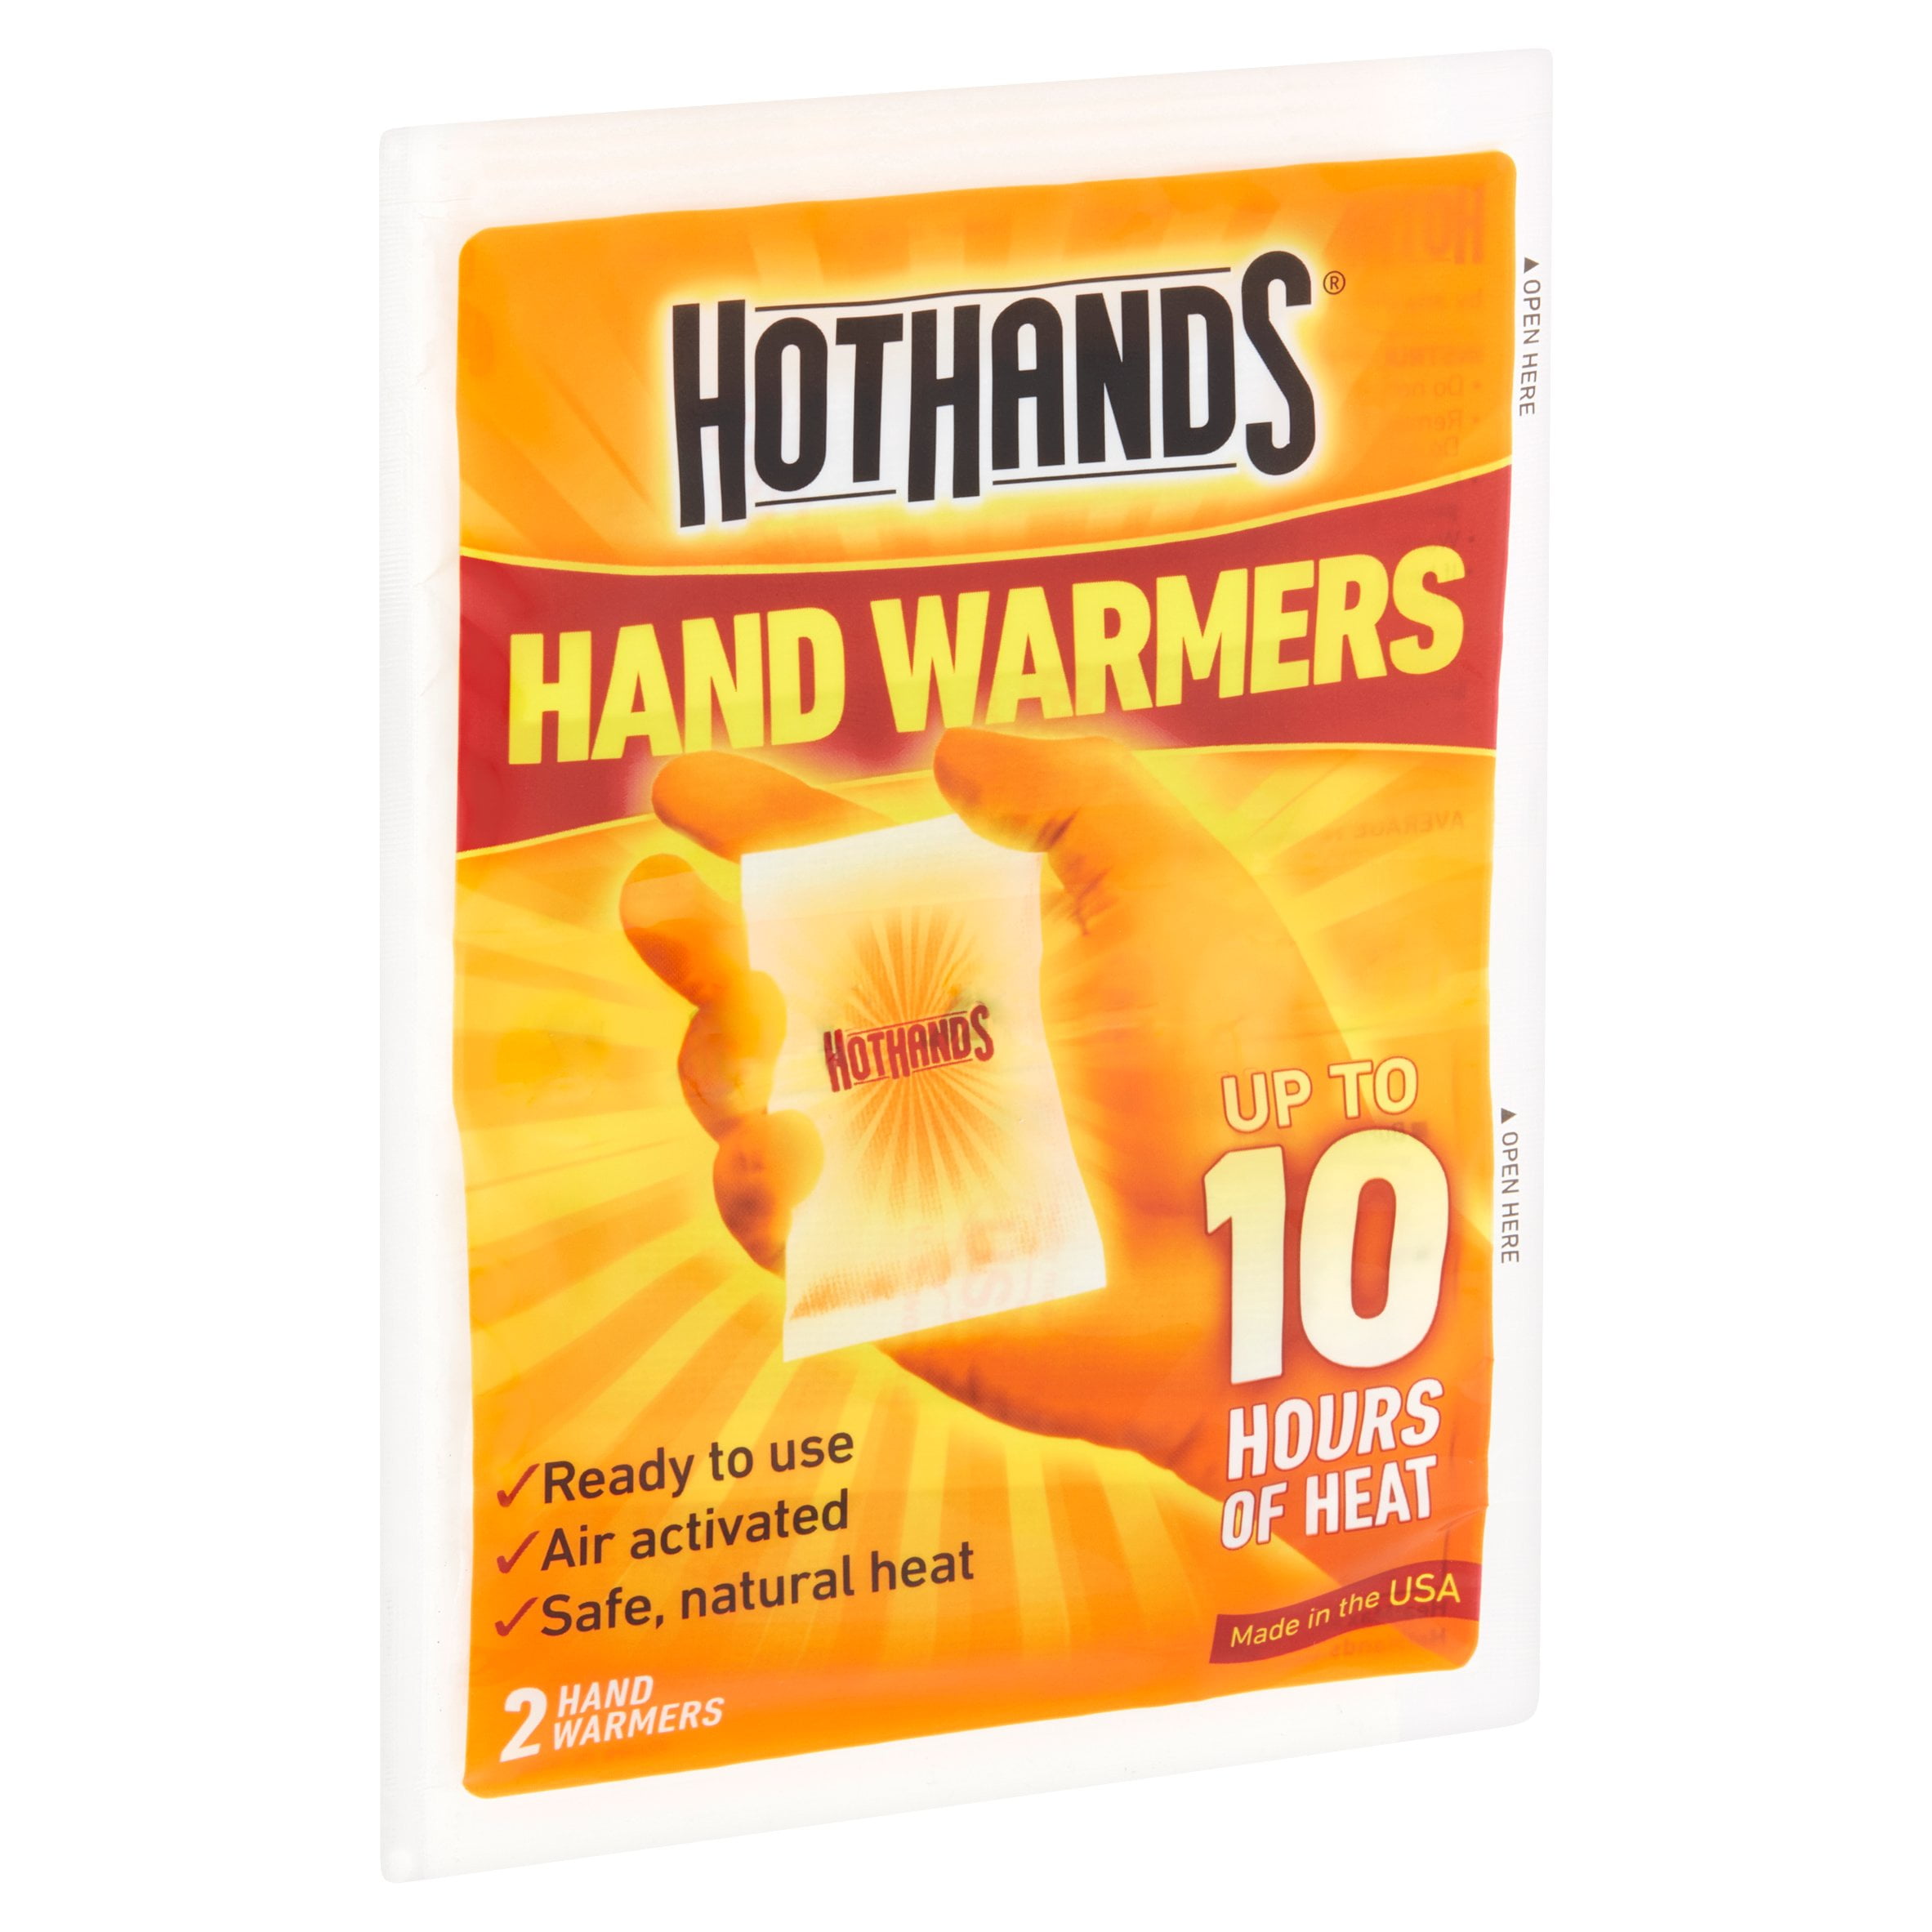 Ice Fishing/Hunting  4PACK 4-Celsius Solid Fuel Sticks for Pocket Hand Warmers 